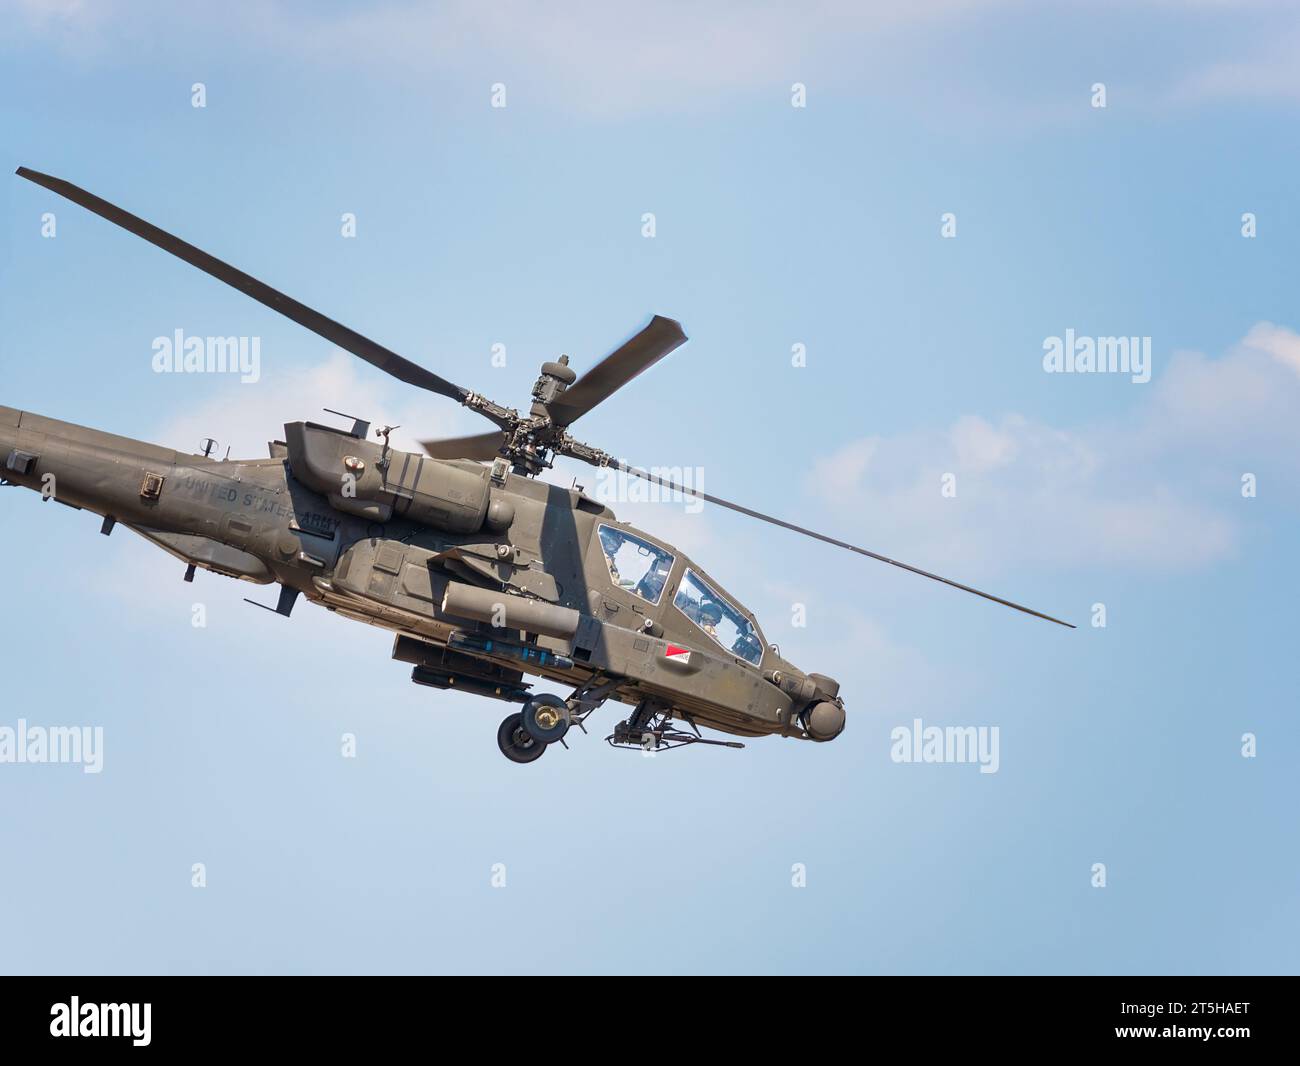 United States military helicopter. Combat US air force. Stock Photo